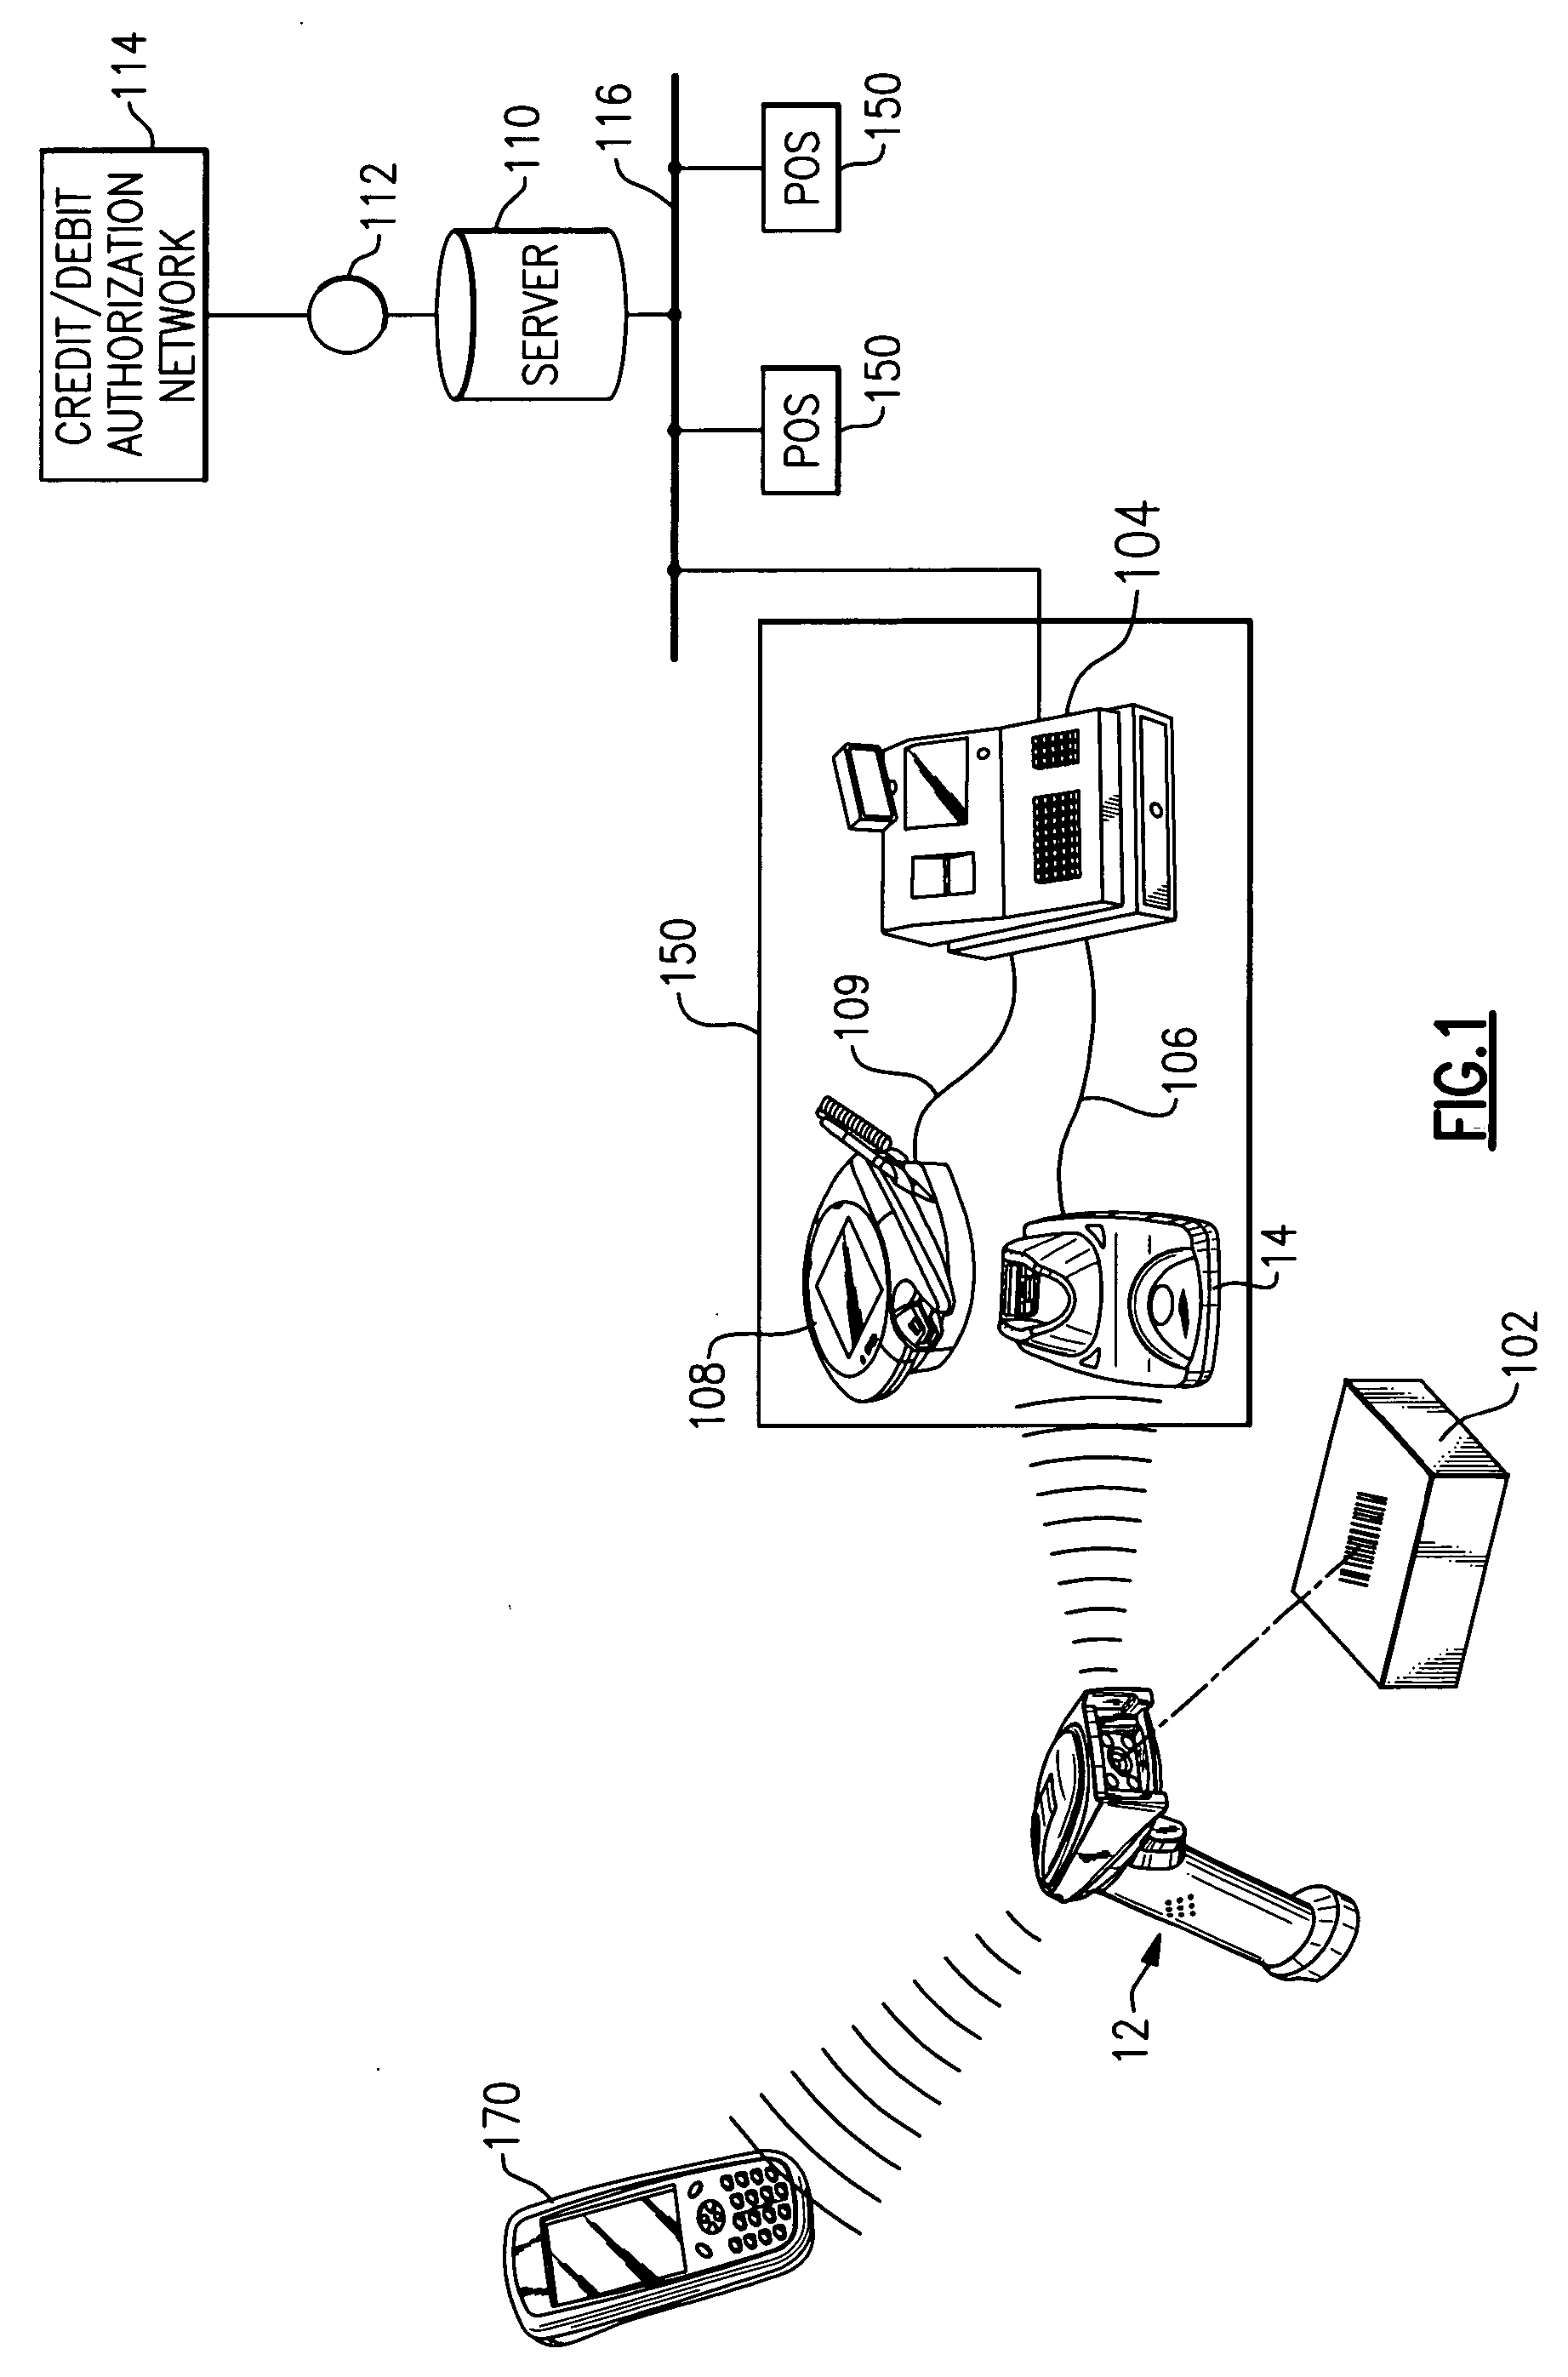 Method and system for linking a wireless hand held optical reader with a base unit or other wireless device